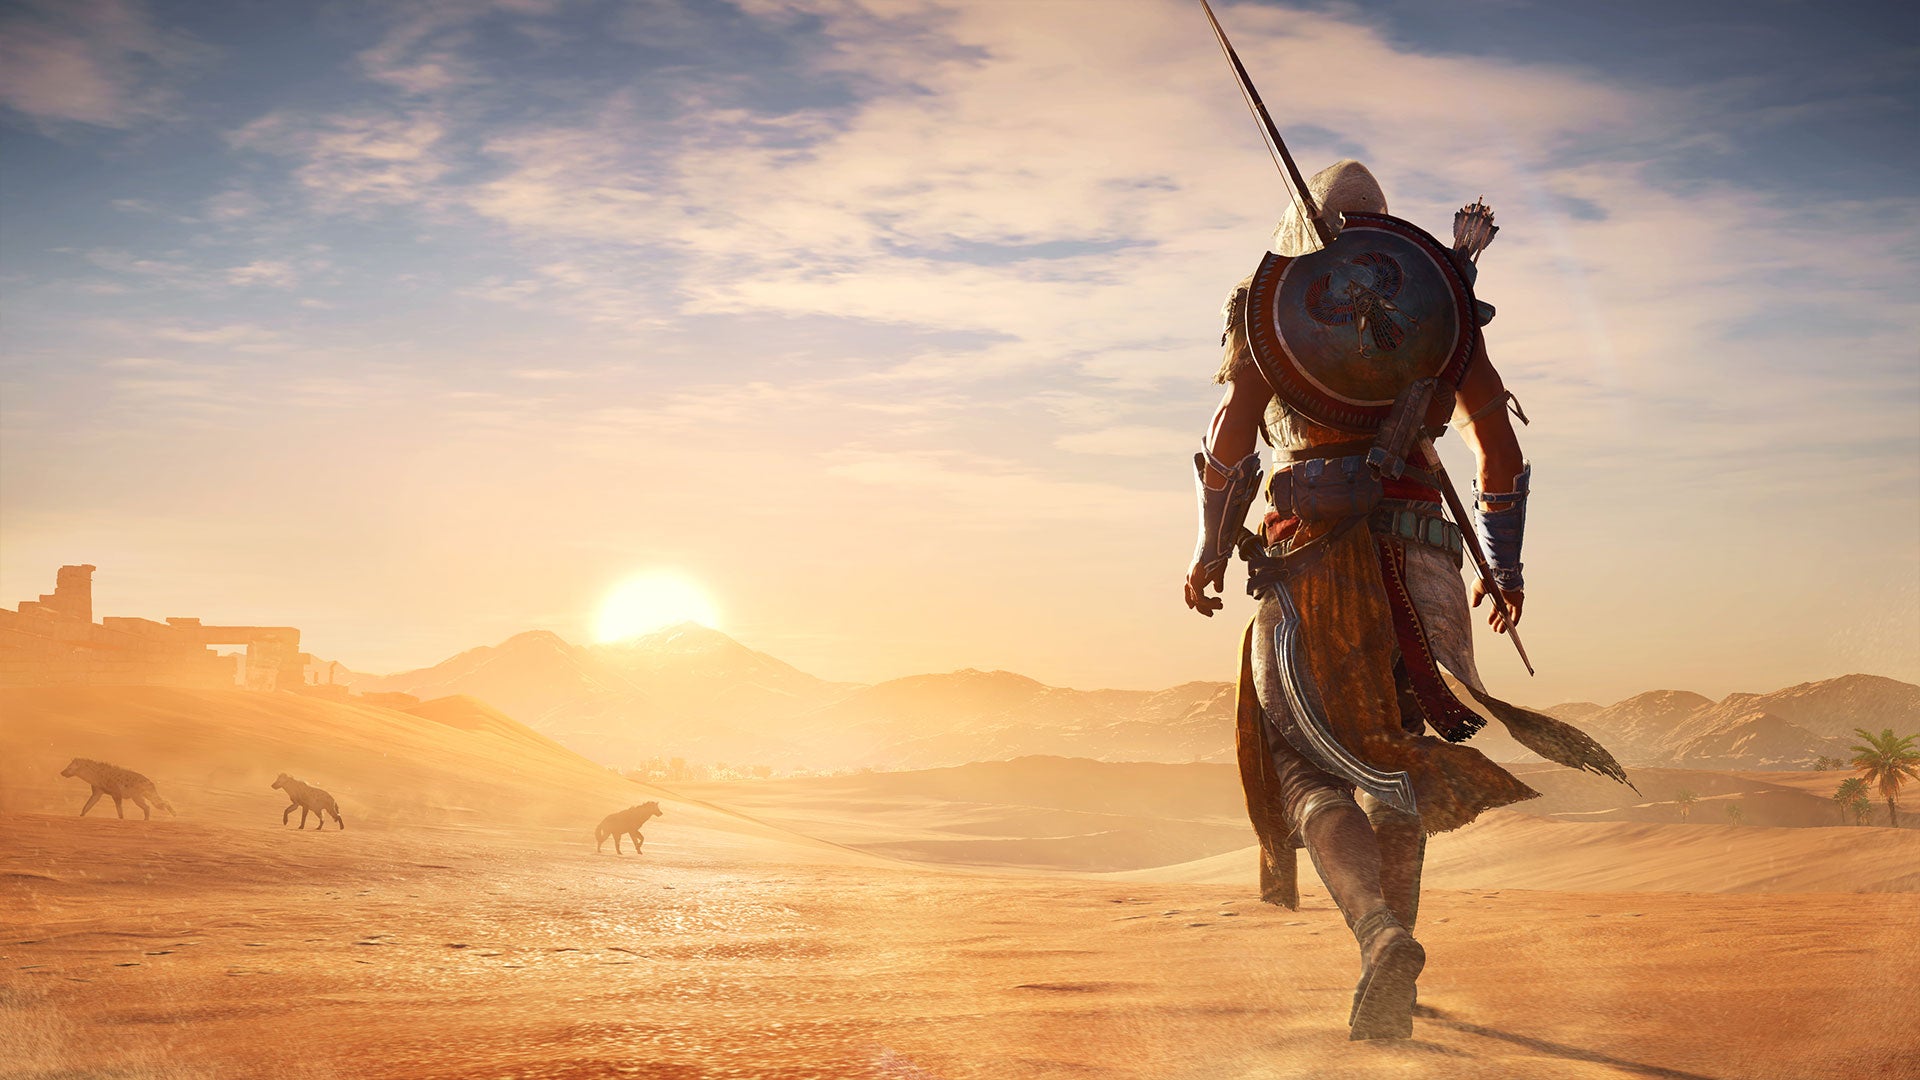 Image for Assassin's Creed Origins and Chorus coming to Xbox Game Pass in June